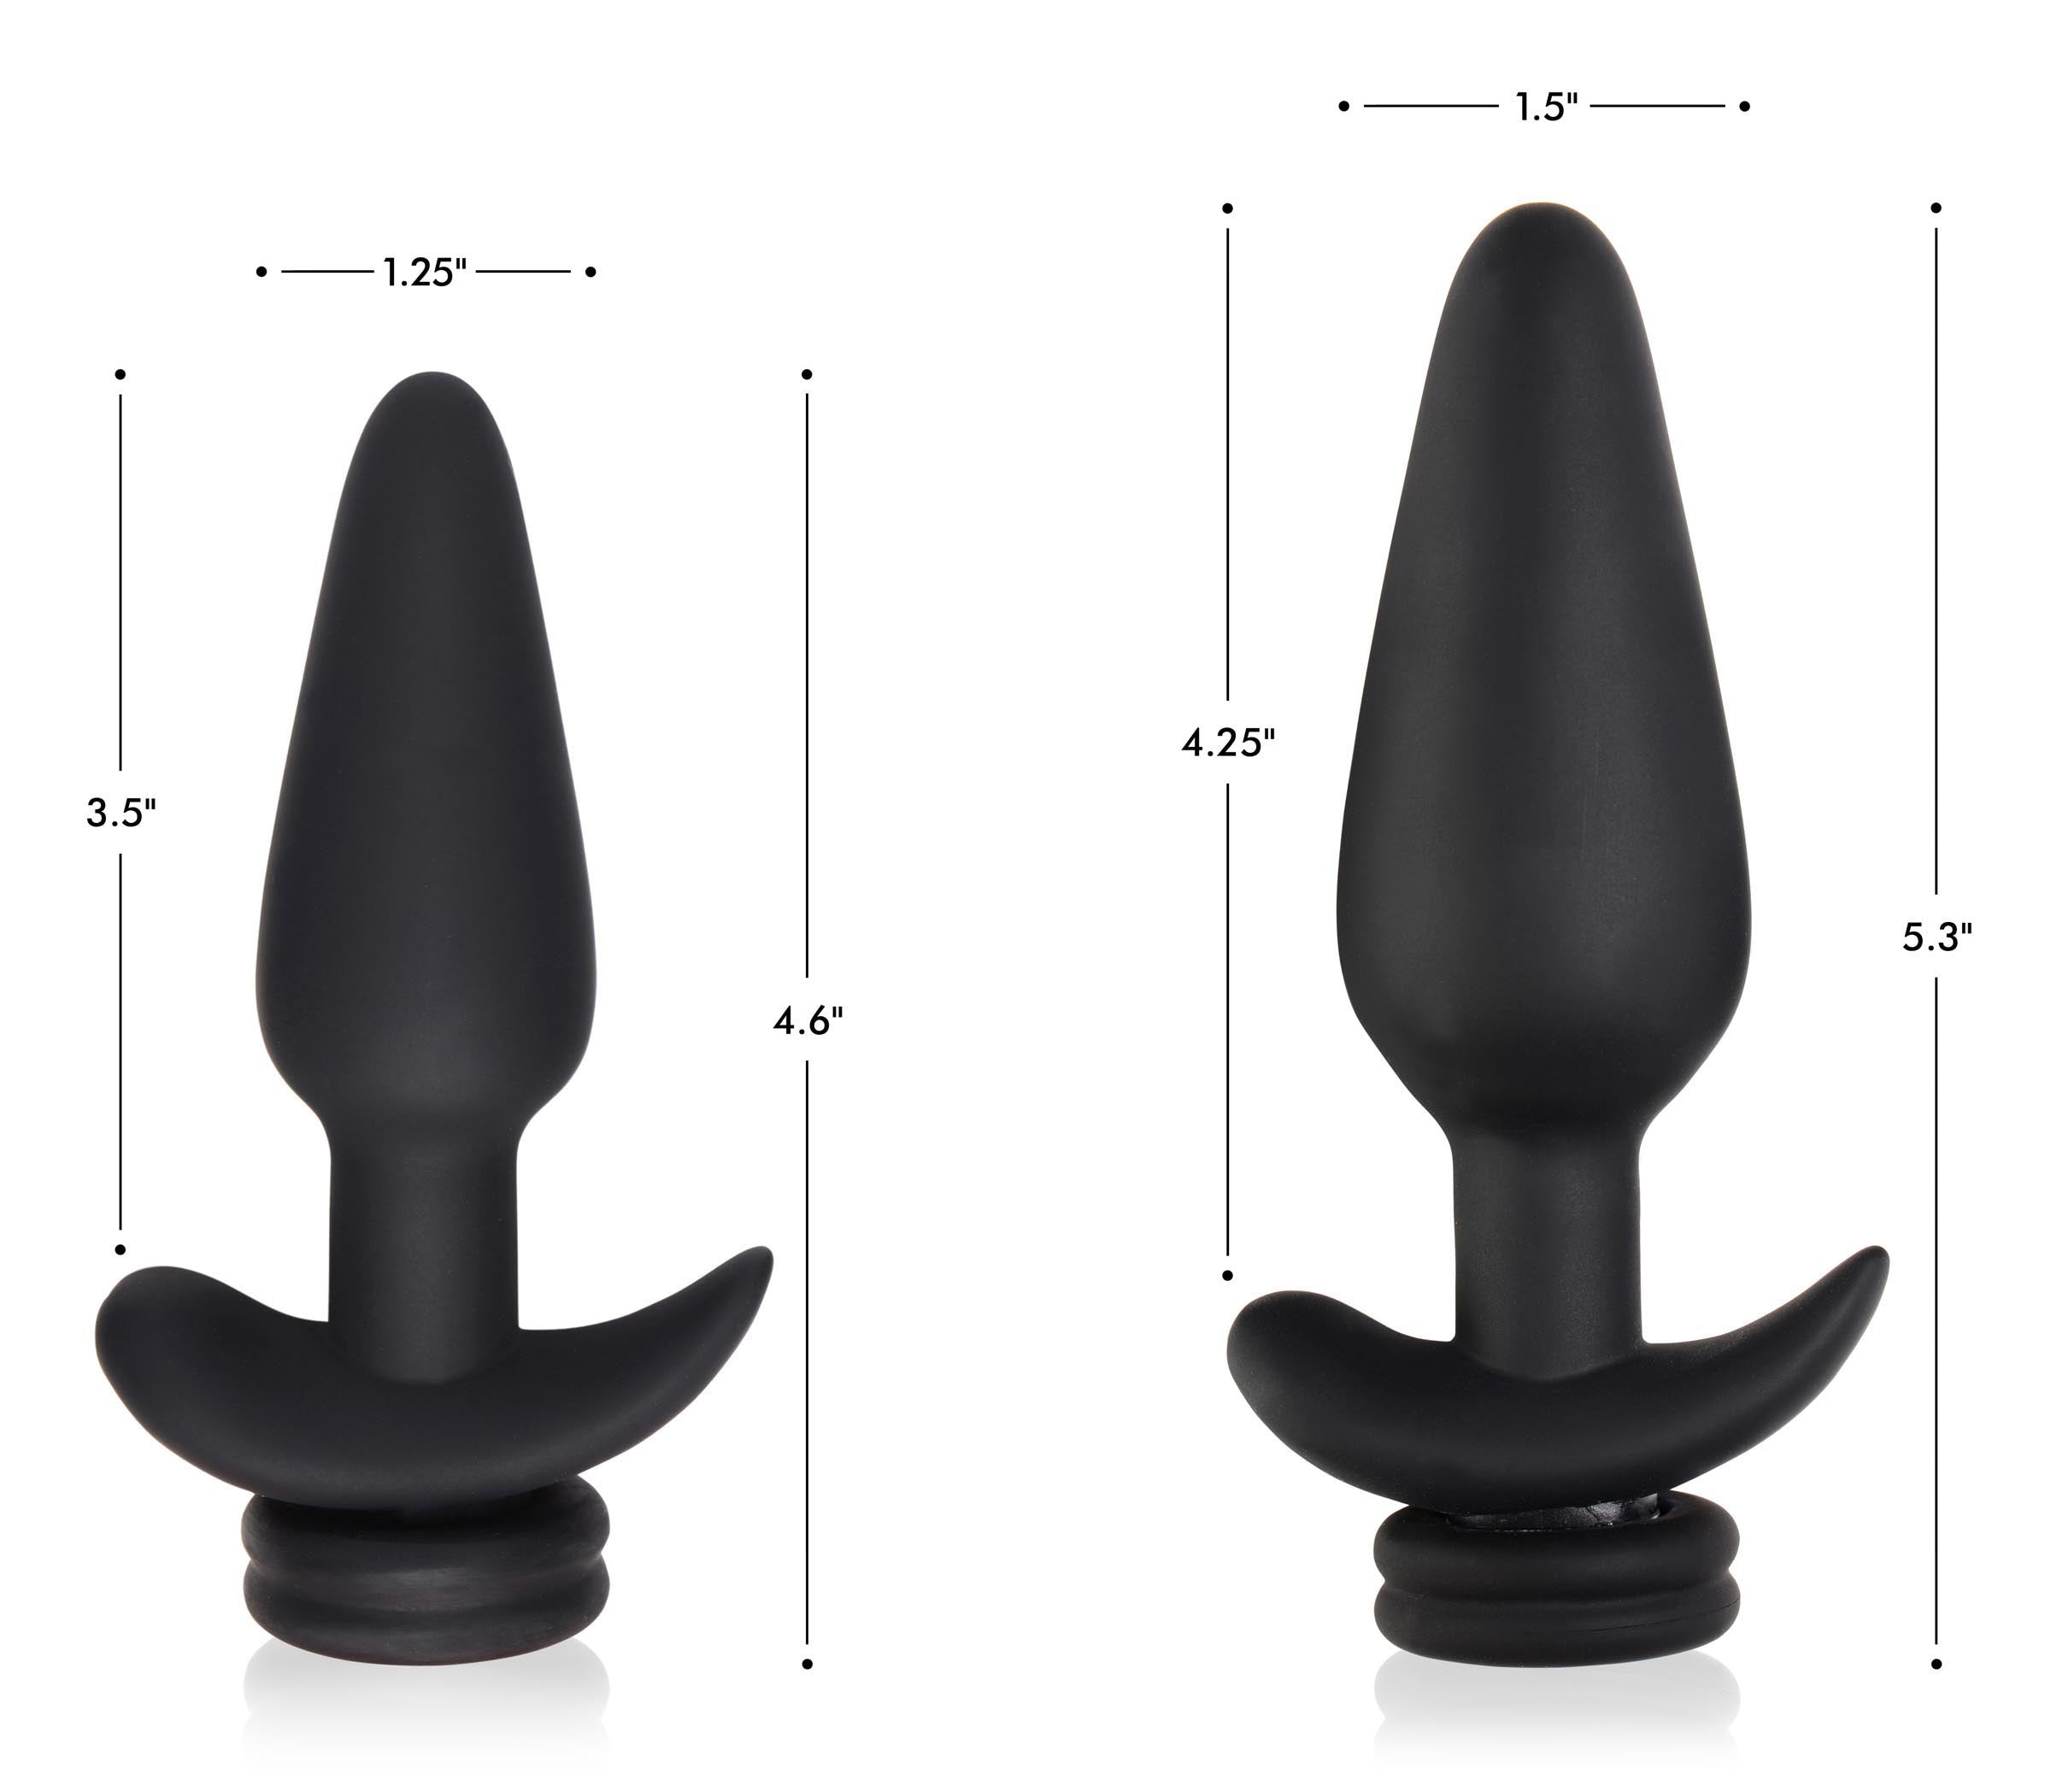 Interchangeable 10X Vibrating Silicone Anal Plug with Remote